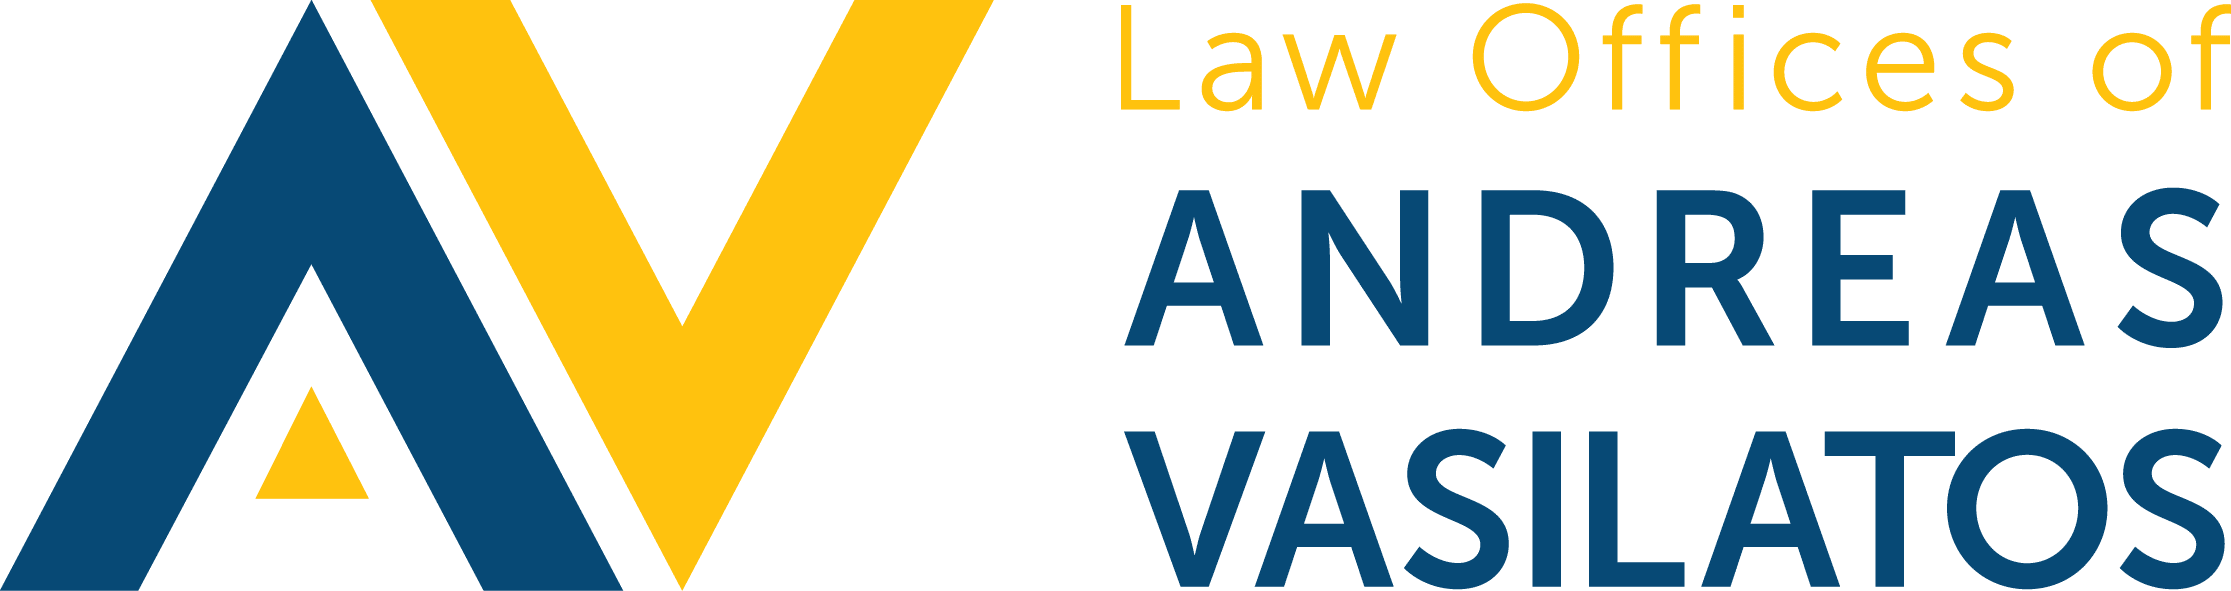 Law Offices of Andreas Vasilatos, PLLC